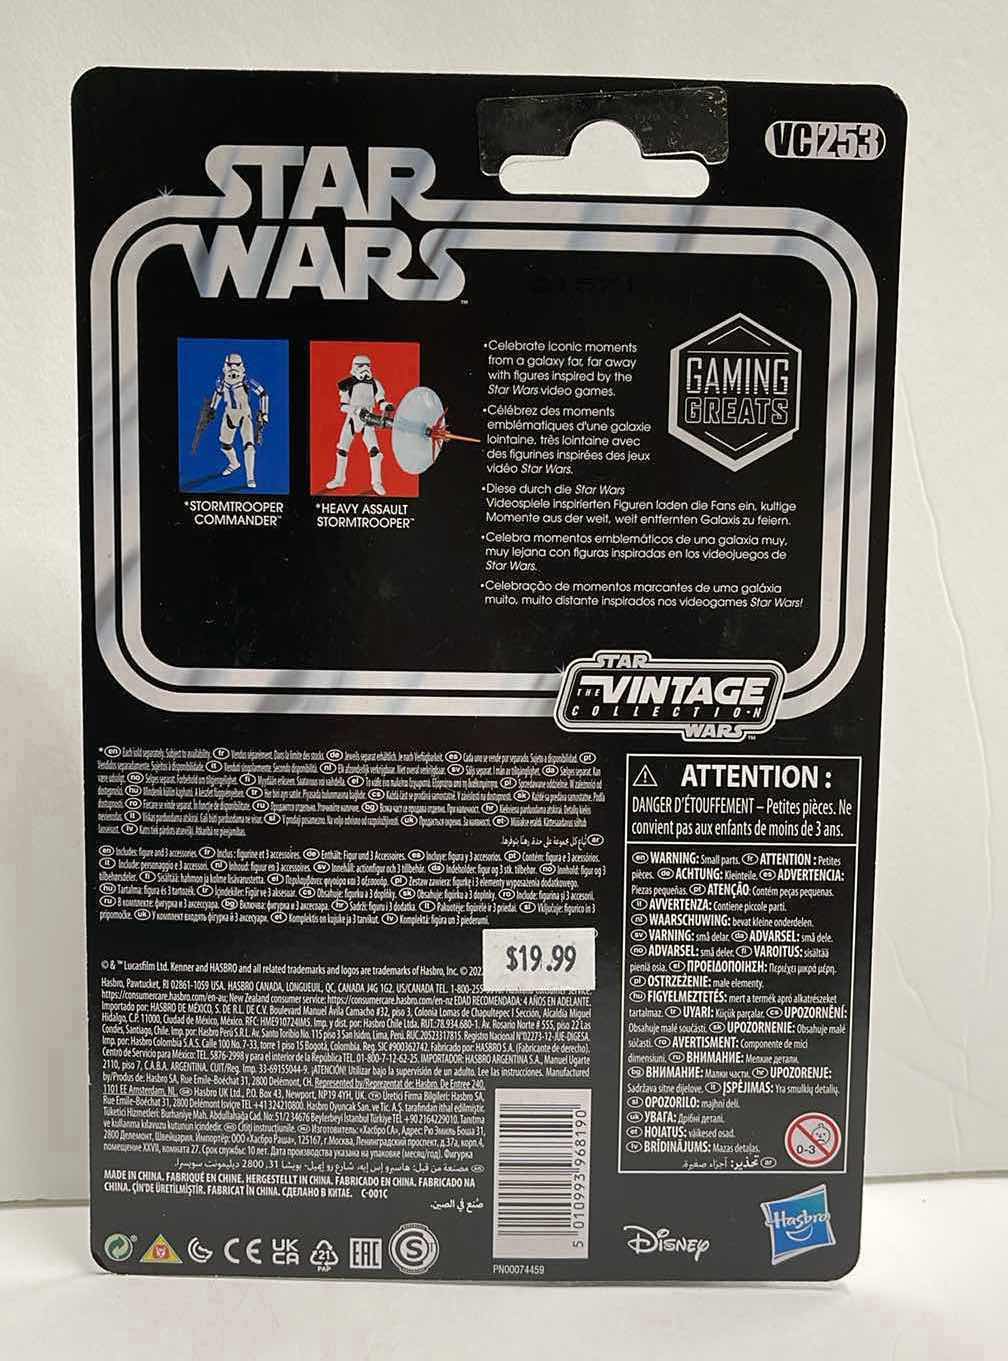 Photo 2 of NIB STAR WARS THE VINTAGE COLLECTION “HEAVY ASSAULT STORMTROOPERS” ACTION FIGURE - RETAIL PRICE $19.00